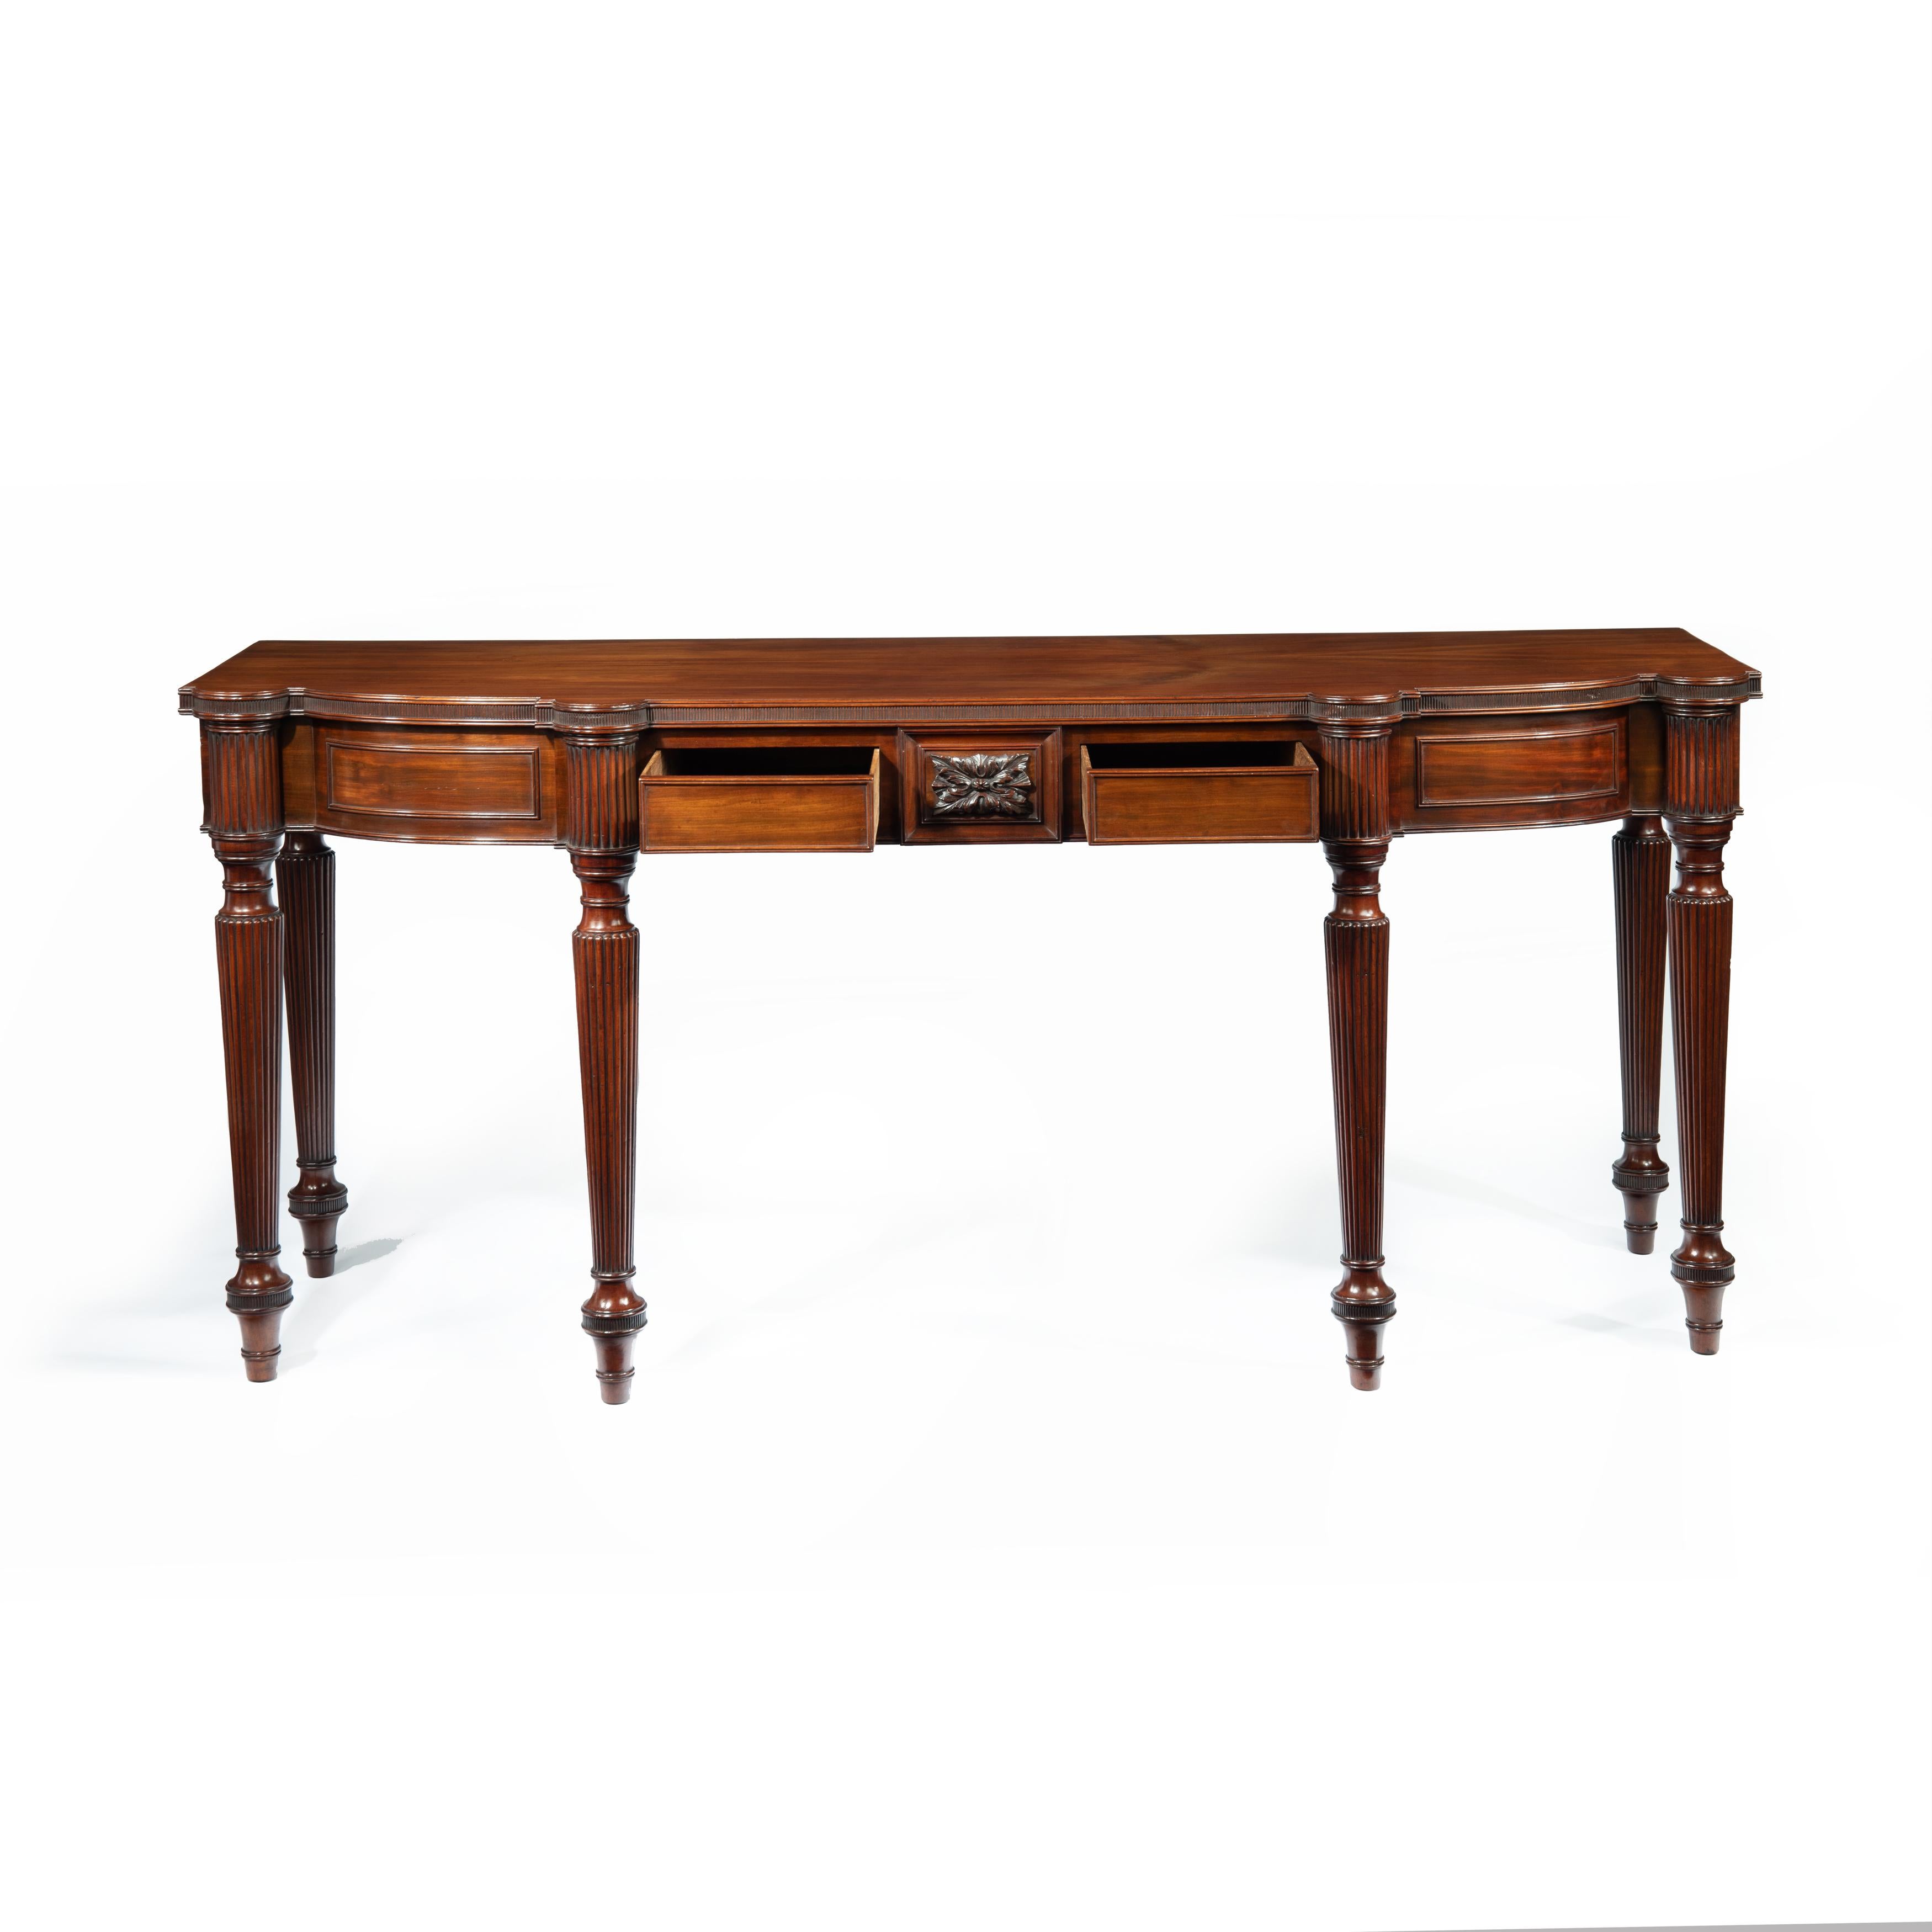 English Regency Mahogany Serving Table Attributed to Gillows